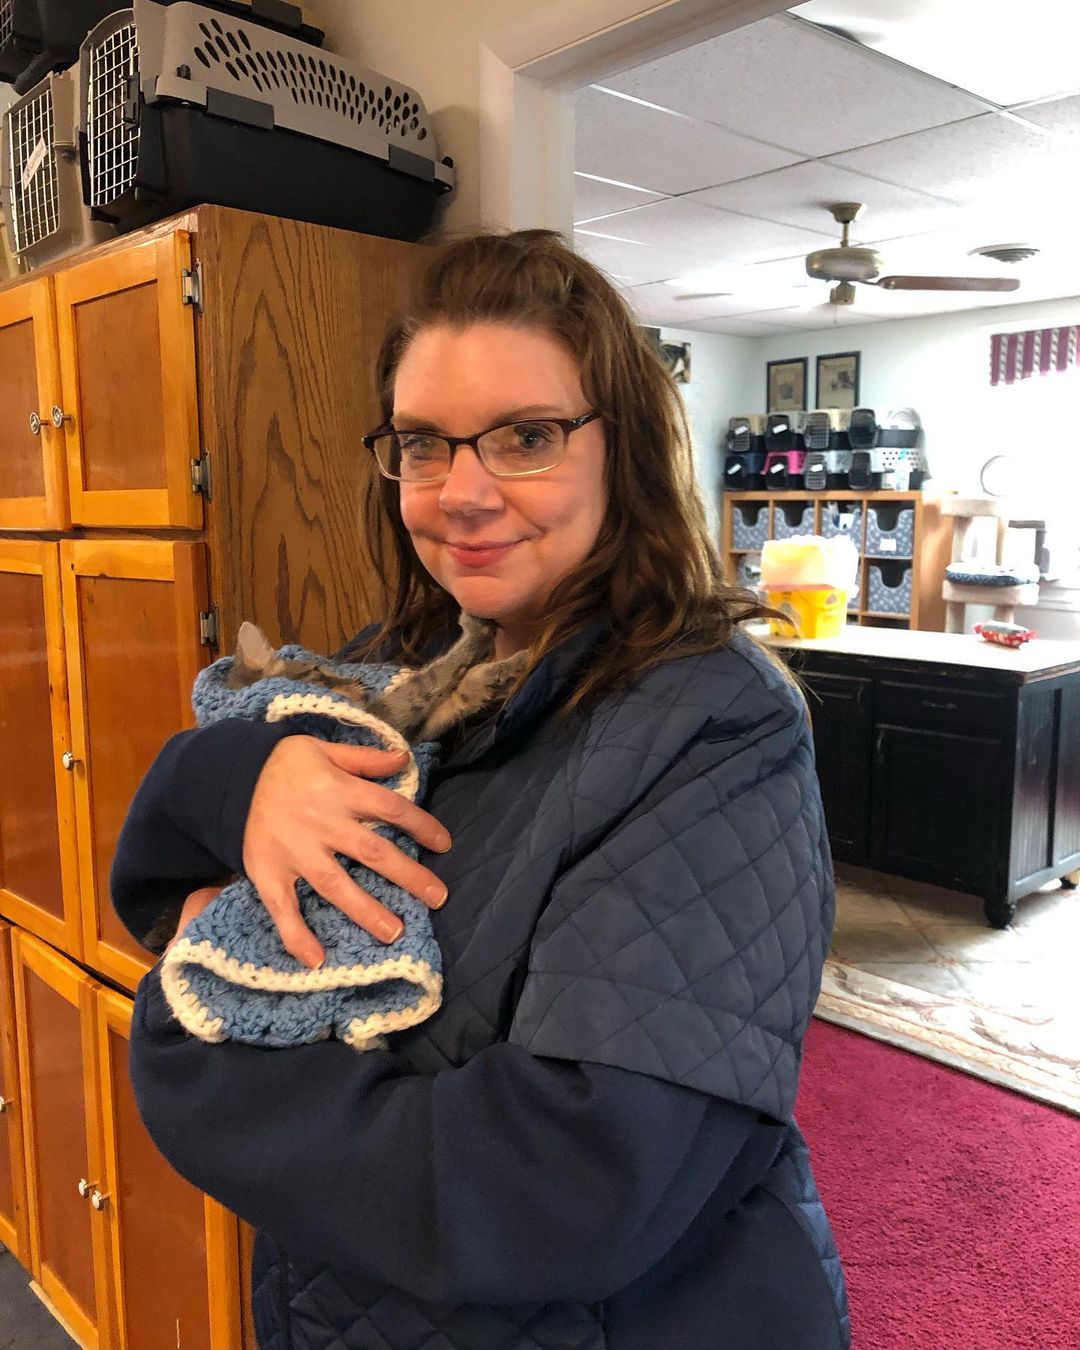 Happy Adoption Day to Fred! Many thanks and congratulations to FLR volunteer Melissa! She fell in love weeks ago but waited patiently while we processed her application. We can’t wait for updates! <a target='_blank' href='https://www.instagram.com/explore/tags/CatsOfGettysburg/'>#CatsOfGettysburg</a> <a target='_blank' href='https://www.instagram.com/explore/tags/TeamForeverLove/'>#TeamForeverLove</a> <a target='_blank' href='https://www.instagram.com/explore/tags/whywedowhatwedo/'>#whywedowhatwedo</a>